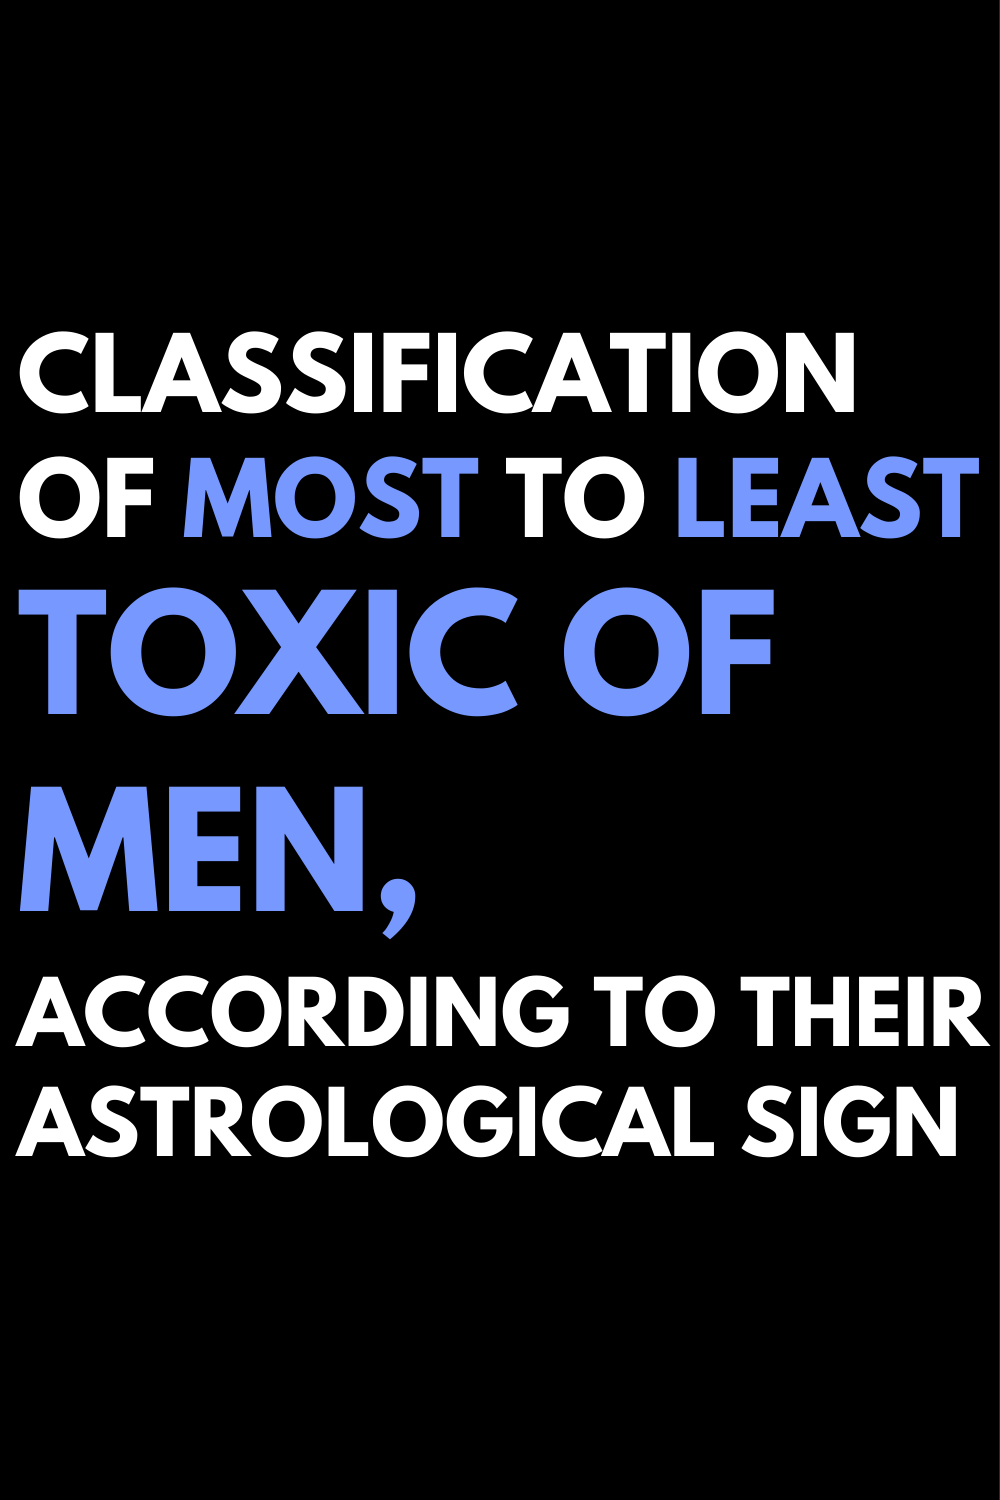 Classification of most to least toxic of men, according to their astrological sign